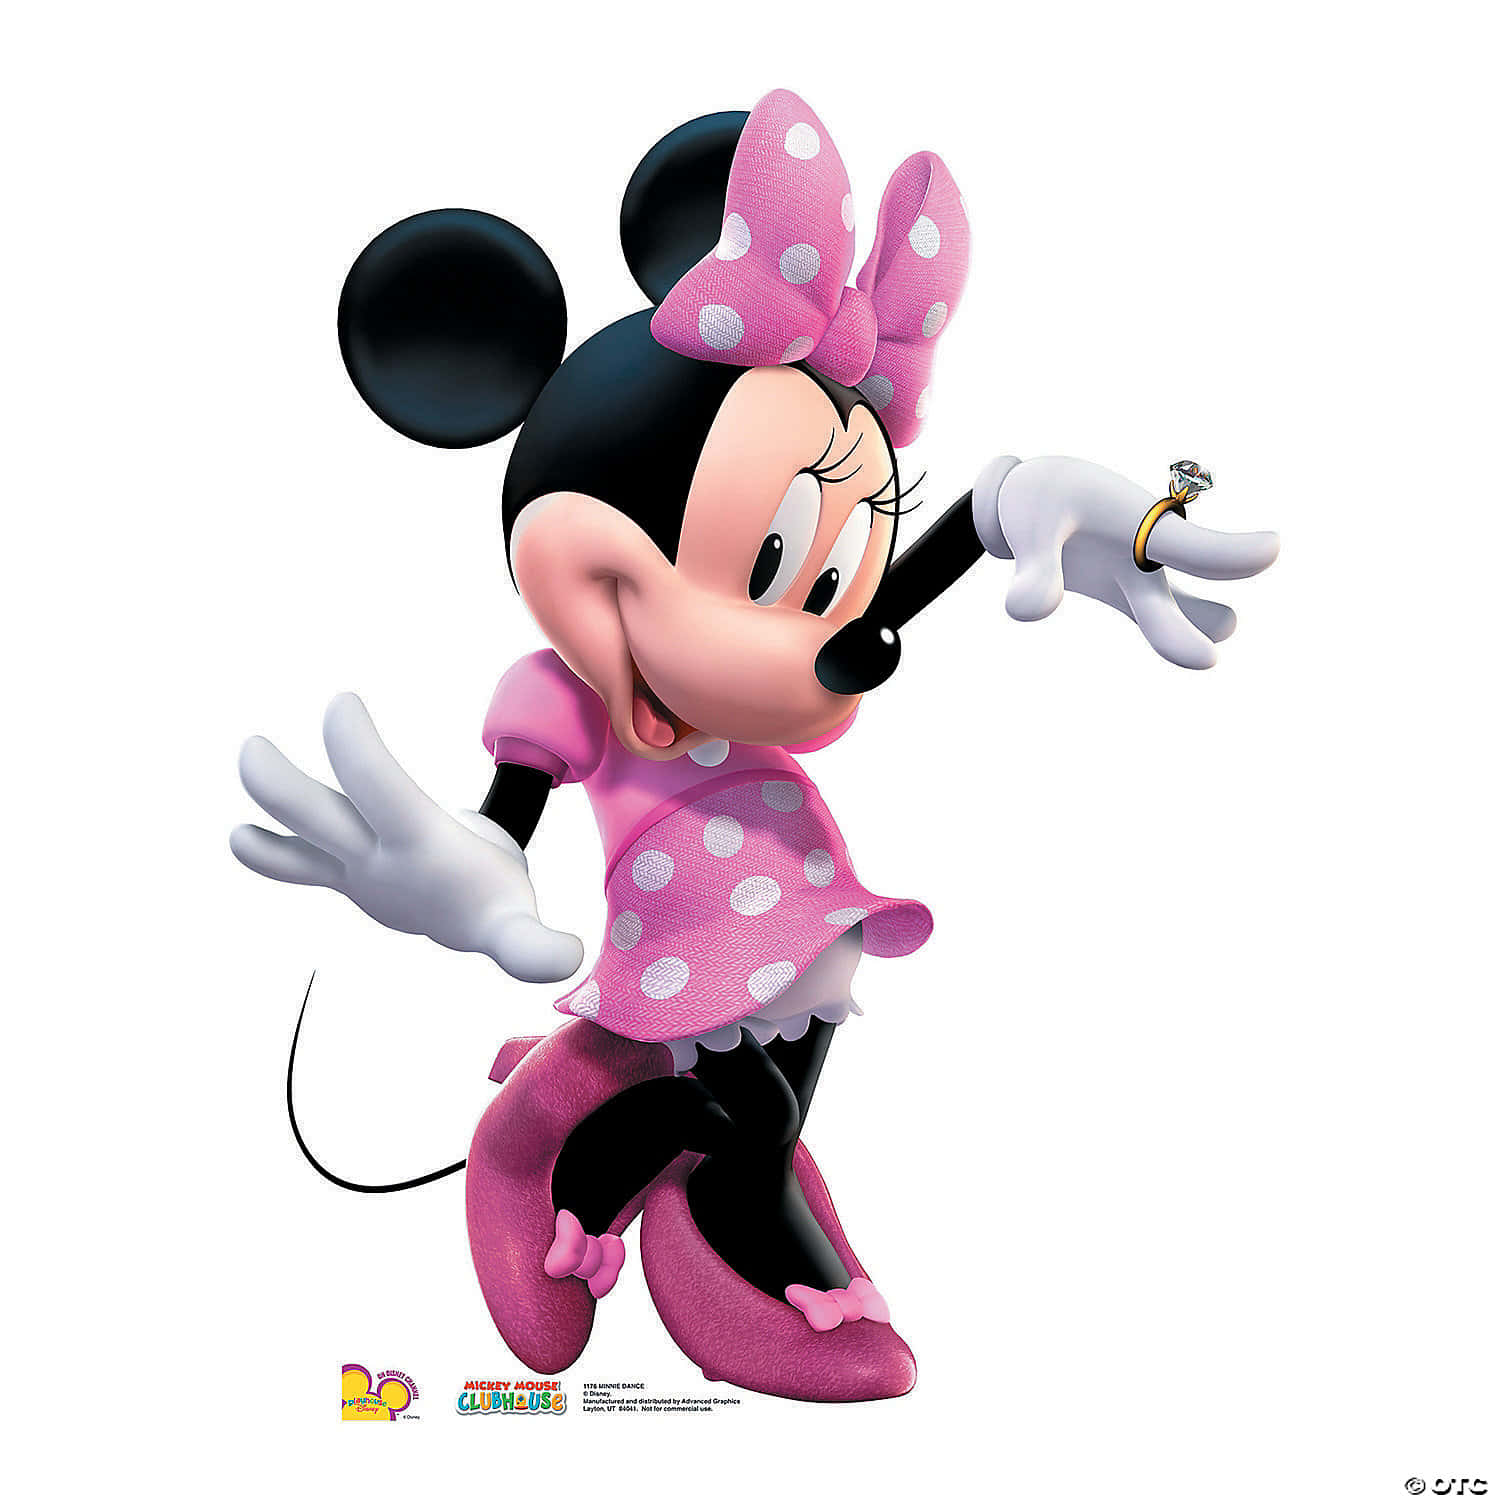 Minnie Mouse, an 80-year-old Disney icon, is an enduring symbol of childhood joy and nostalgia.